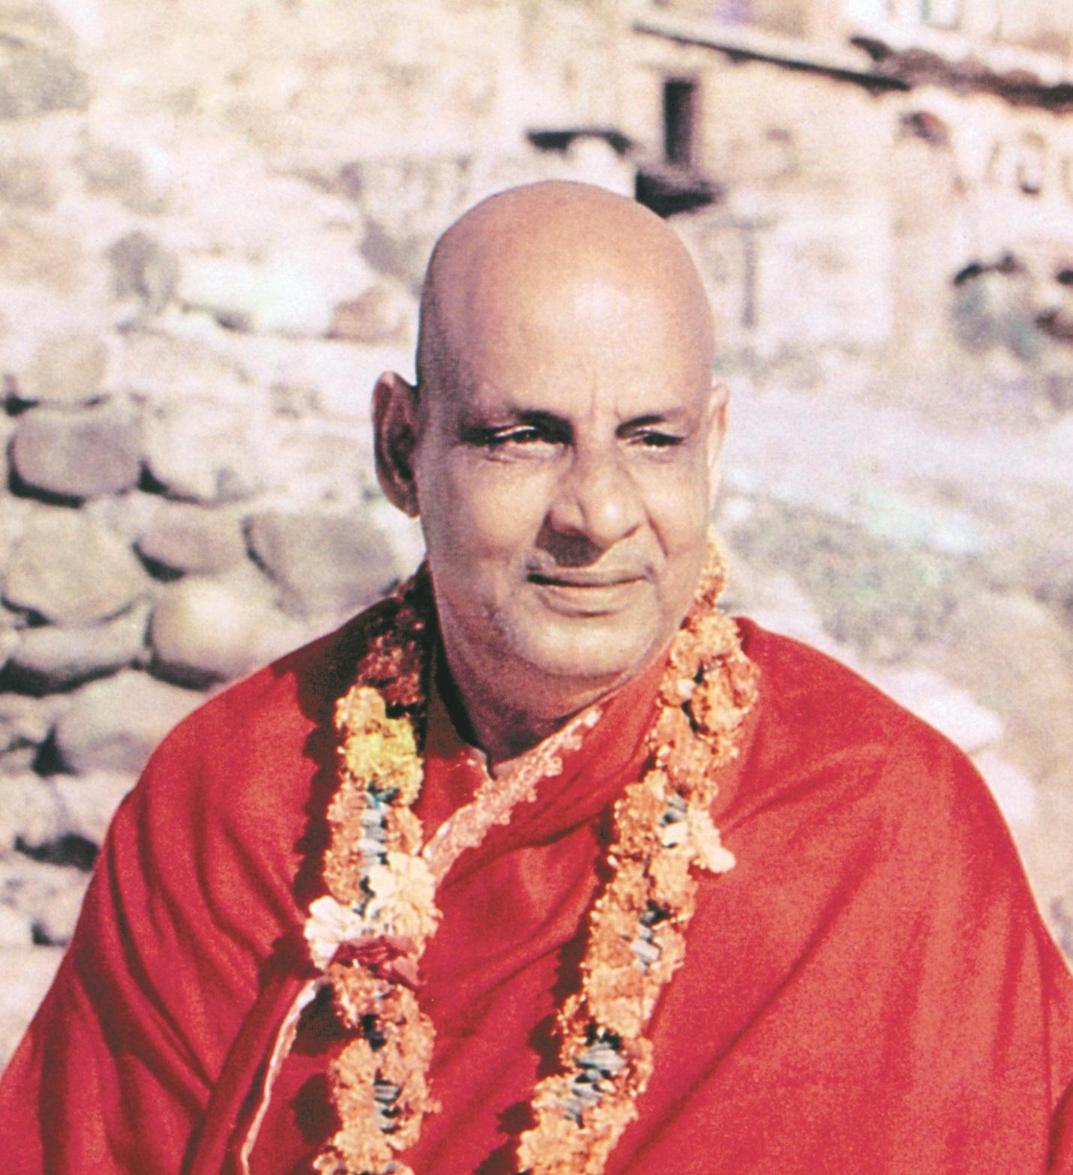 Majestic Swami Sivananda photo in red with garlands